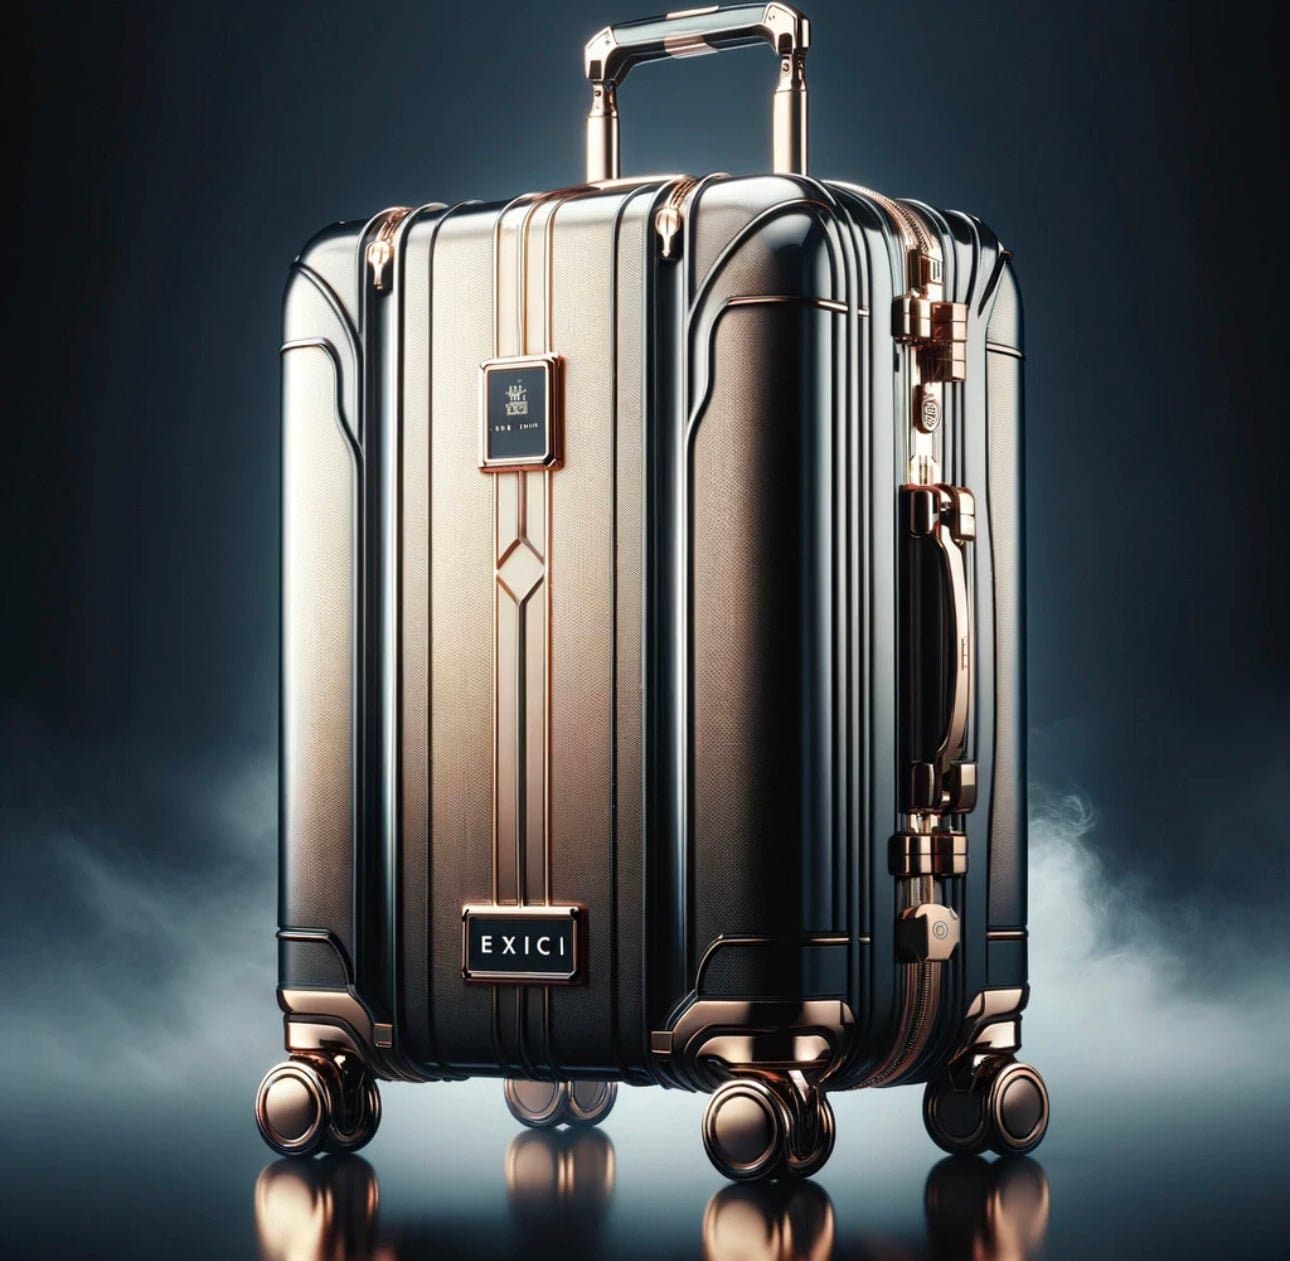 Grand Voyager Suitcase - Exici